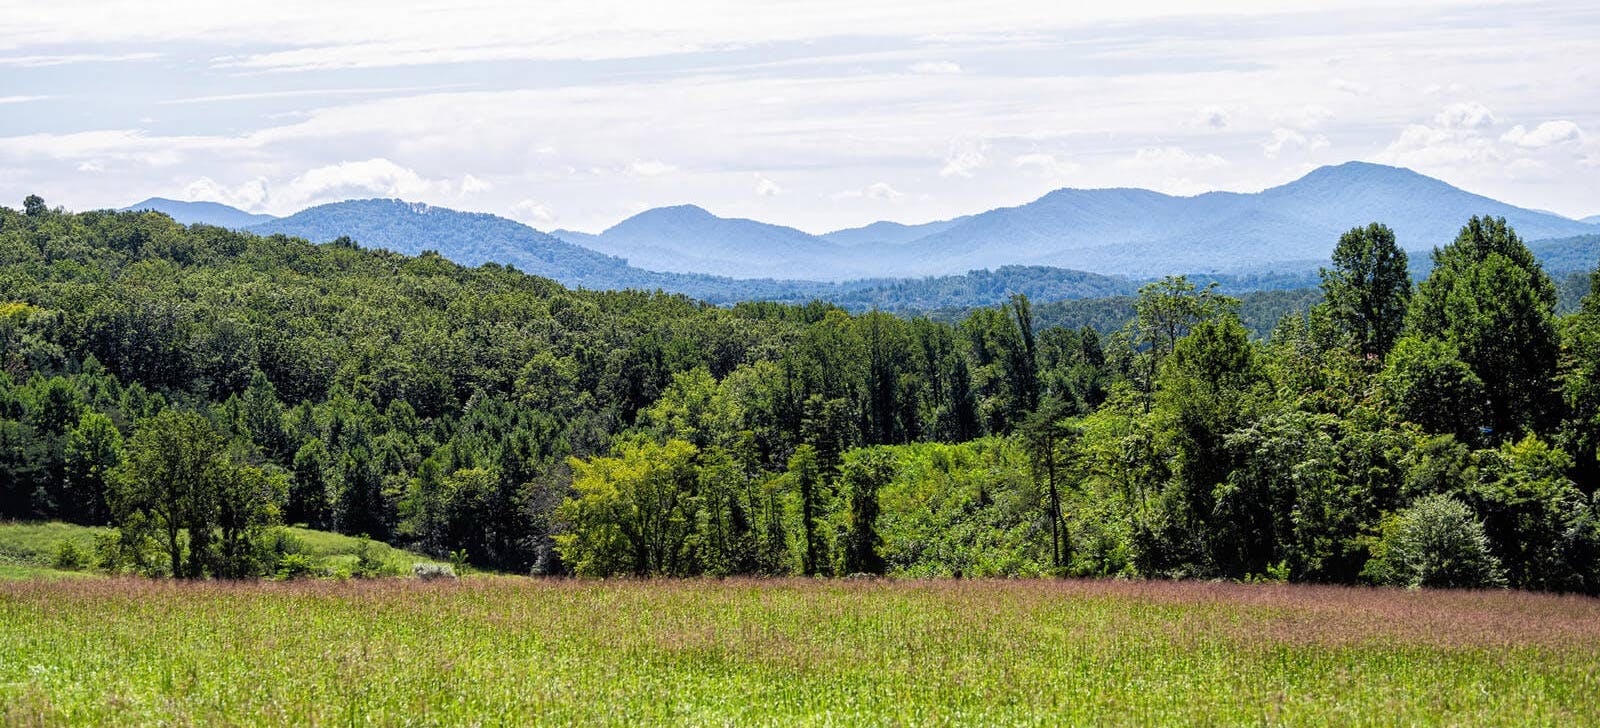 Virginia landscape with forests and mountains